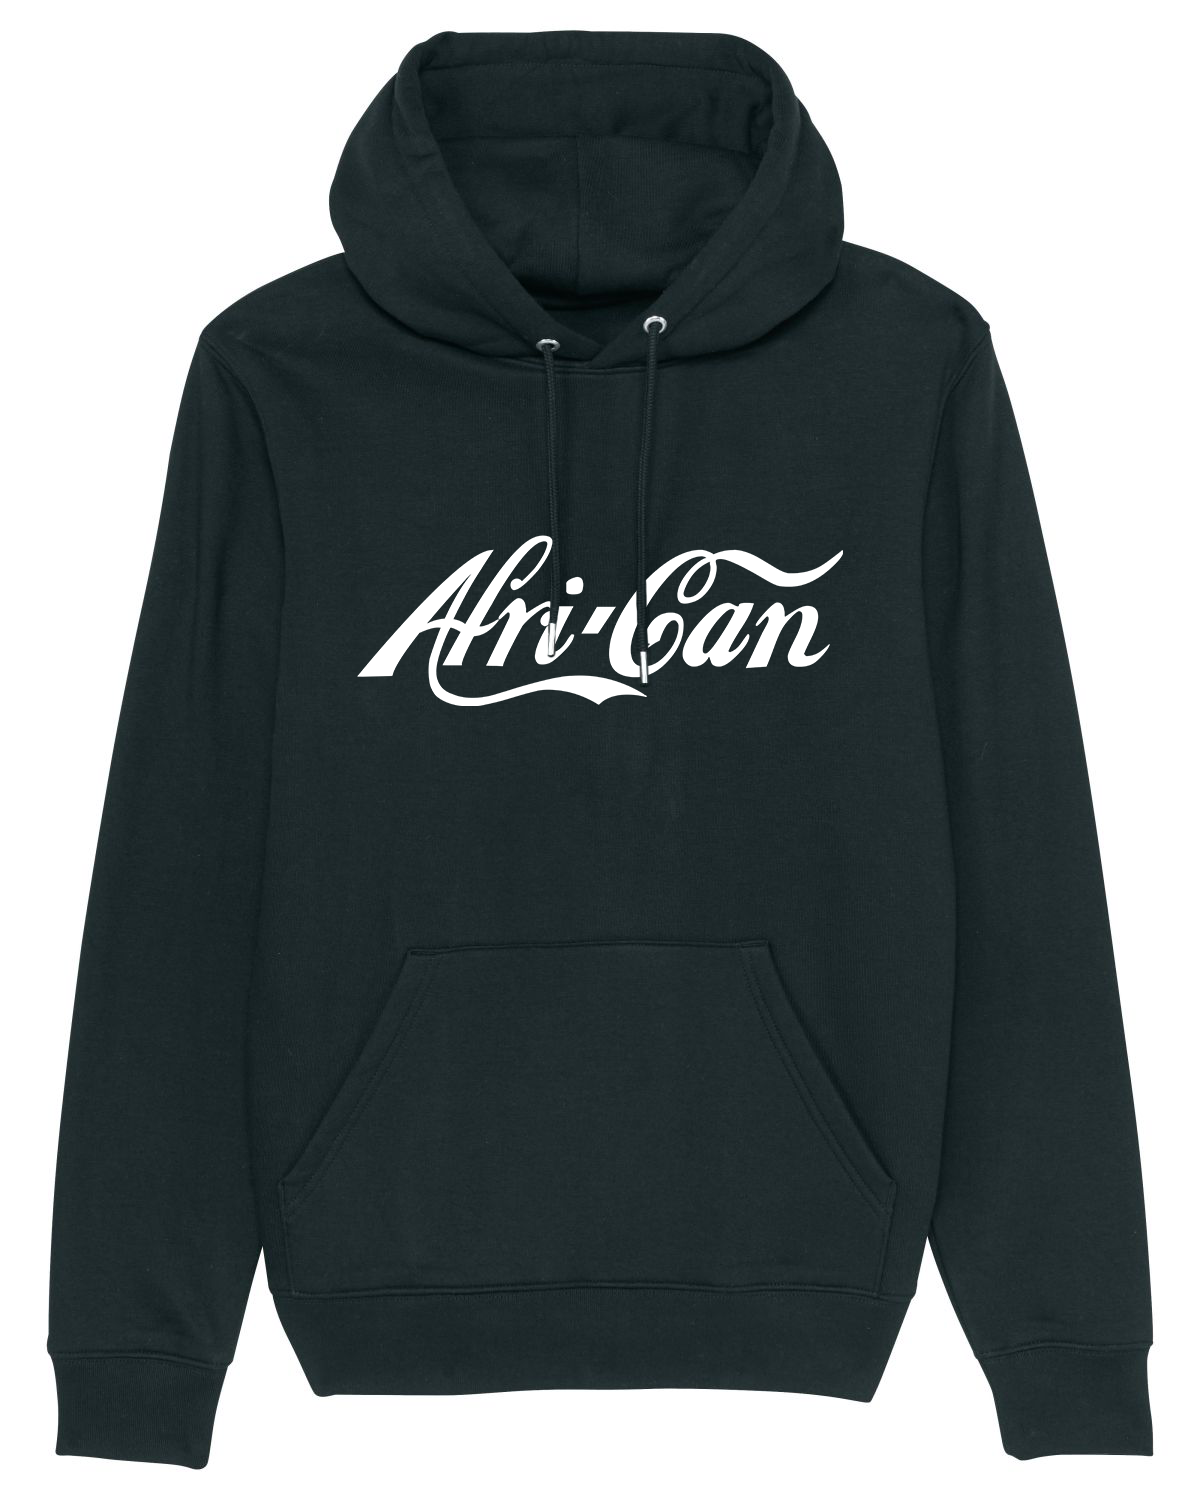 Afri-Can, organic cotton hoodie -black with white font